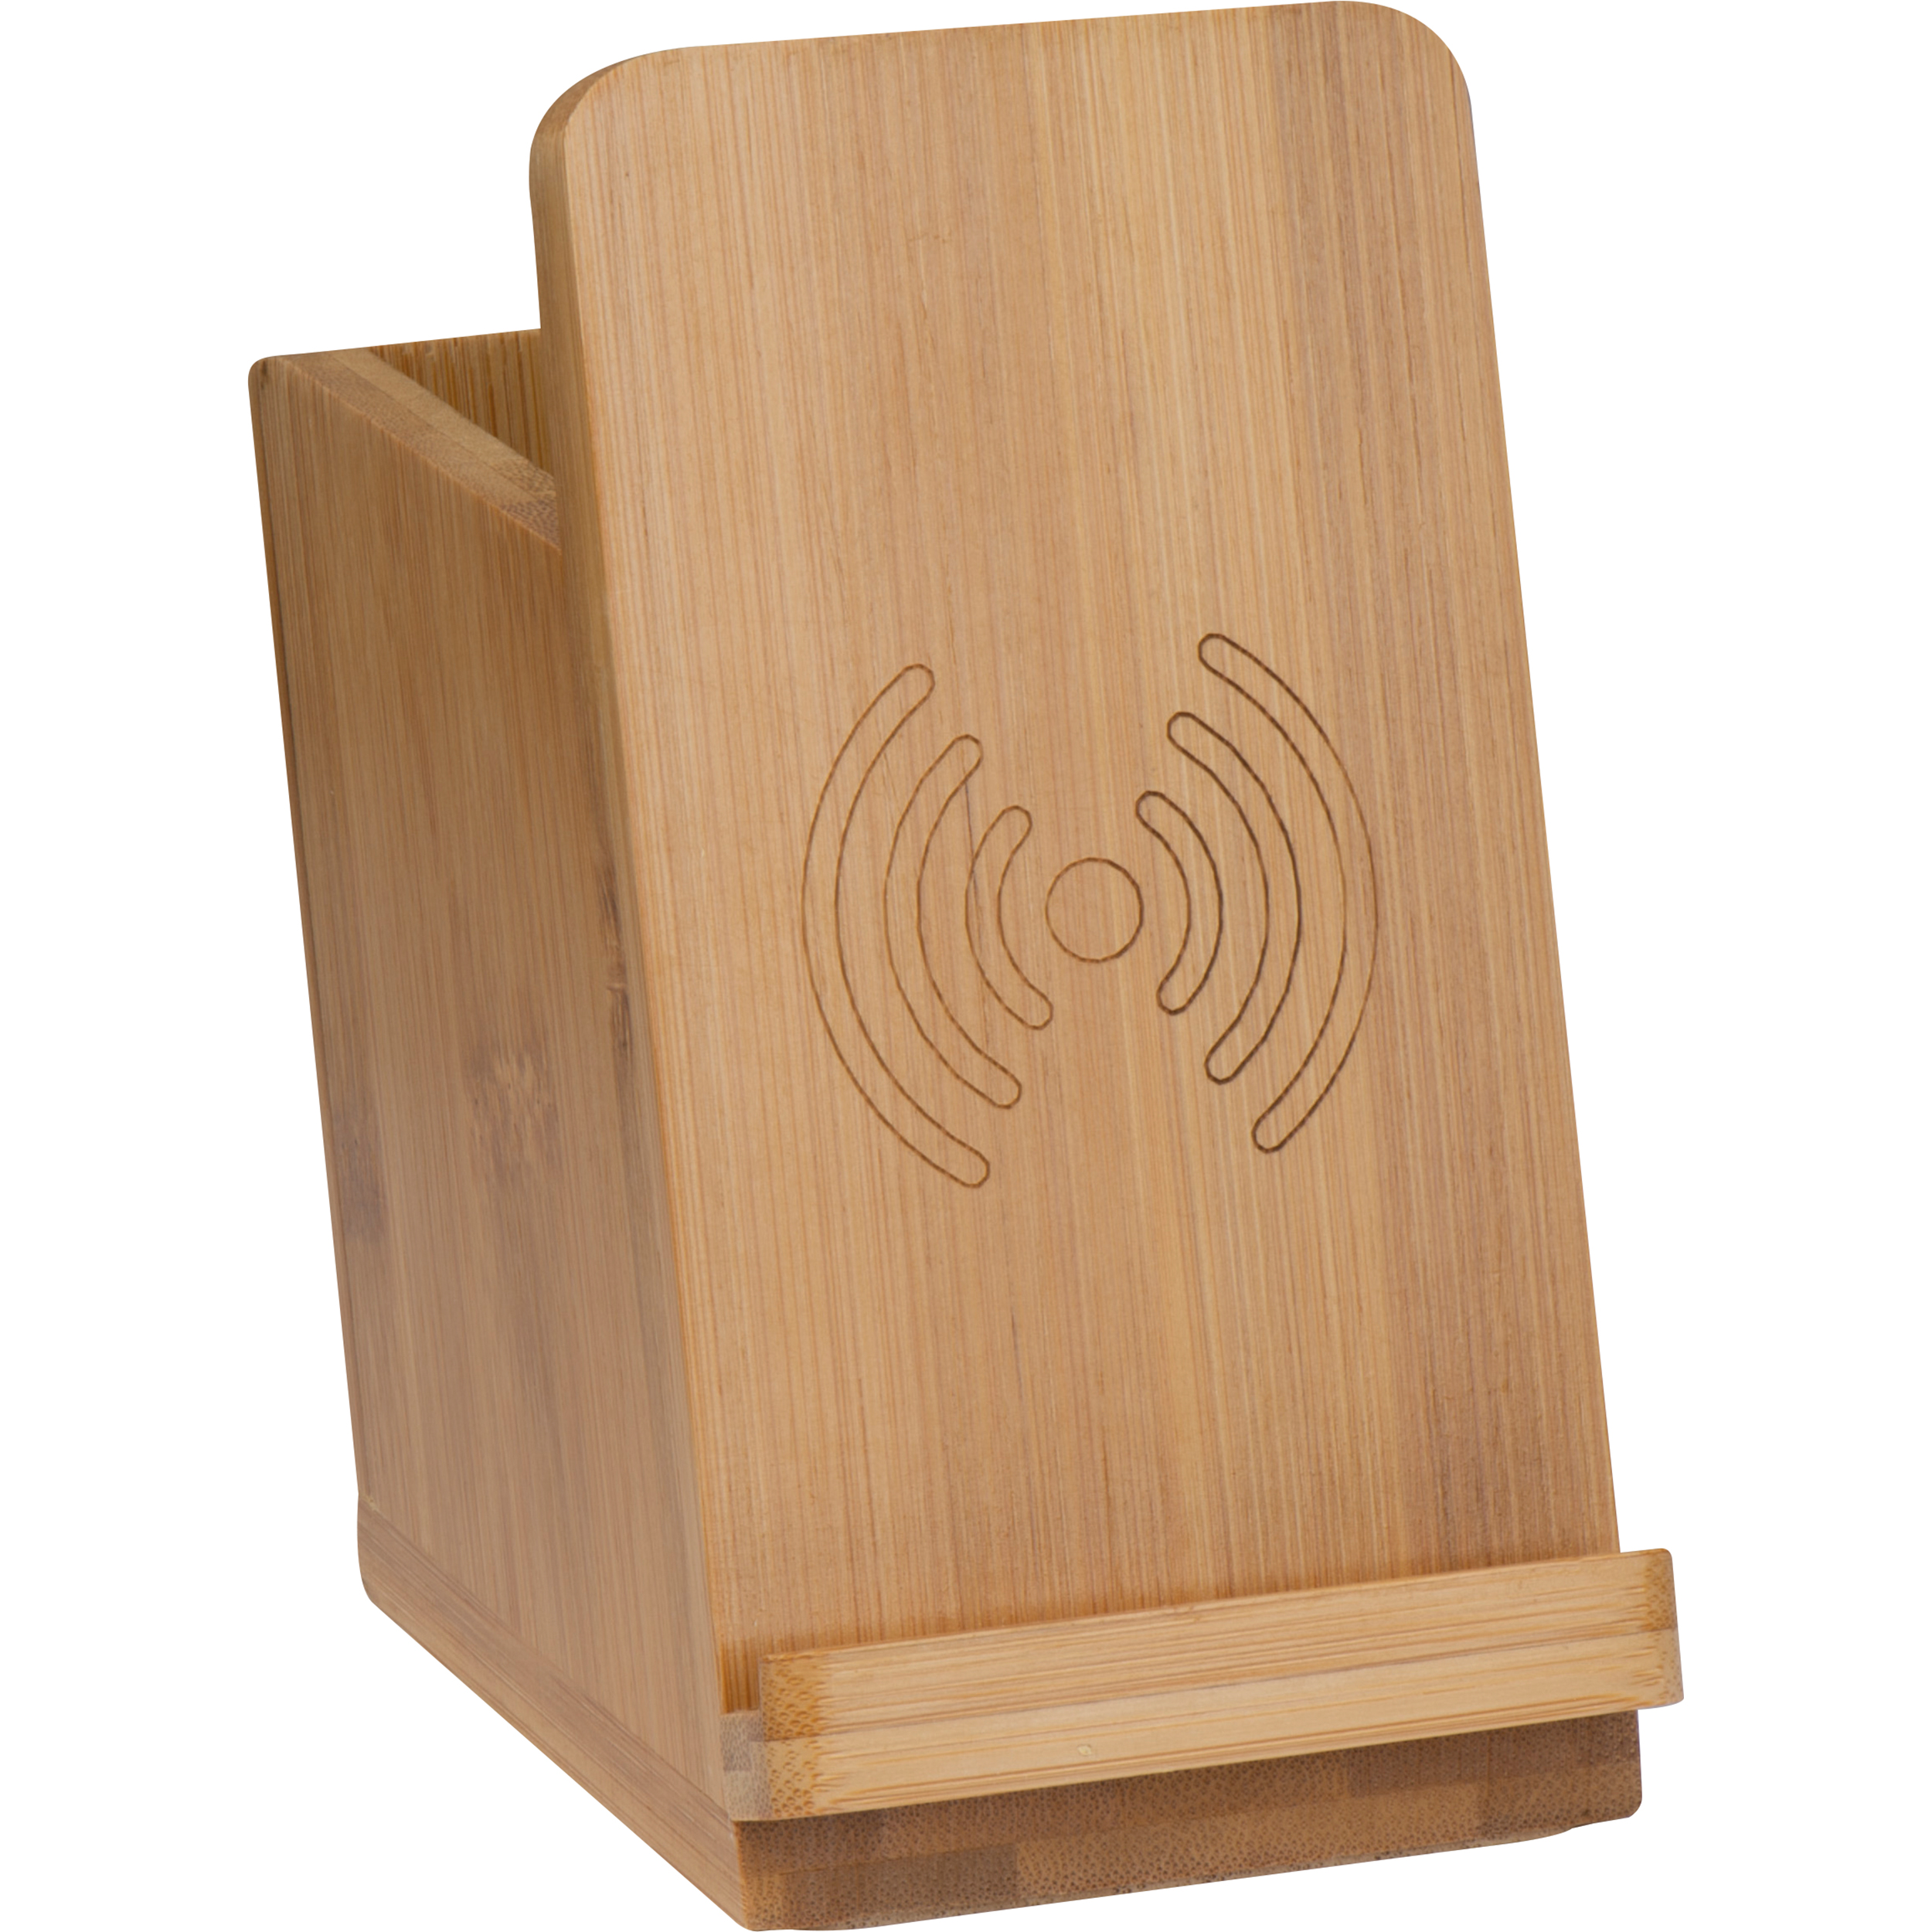 Bamboo wireless charger with pen holder